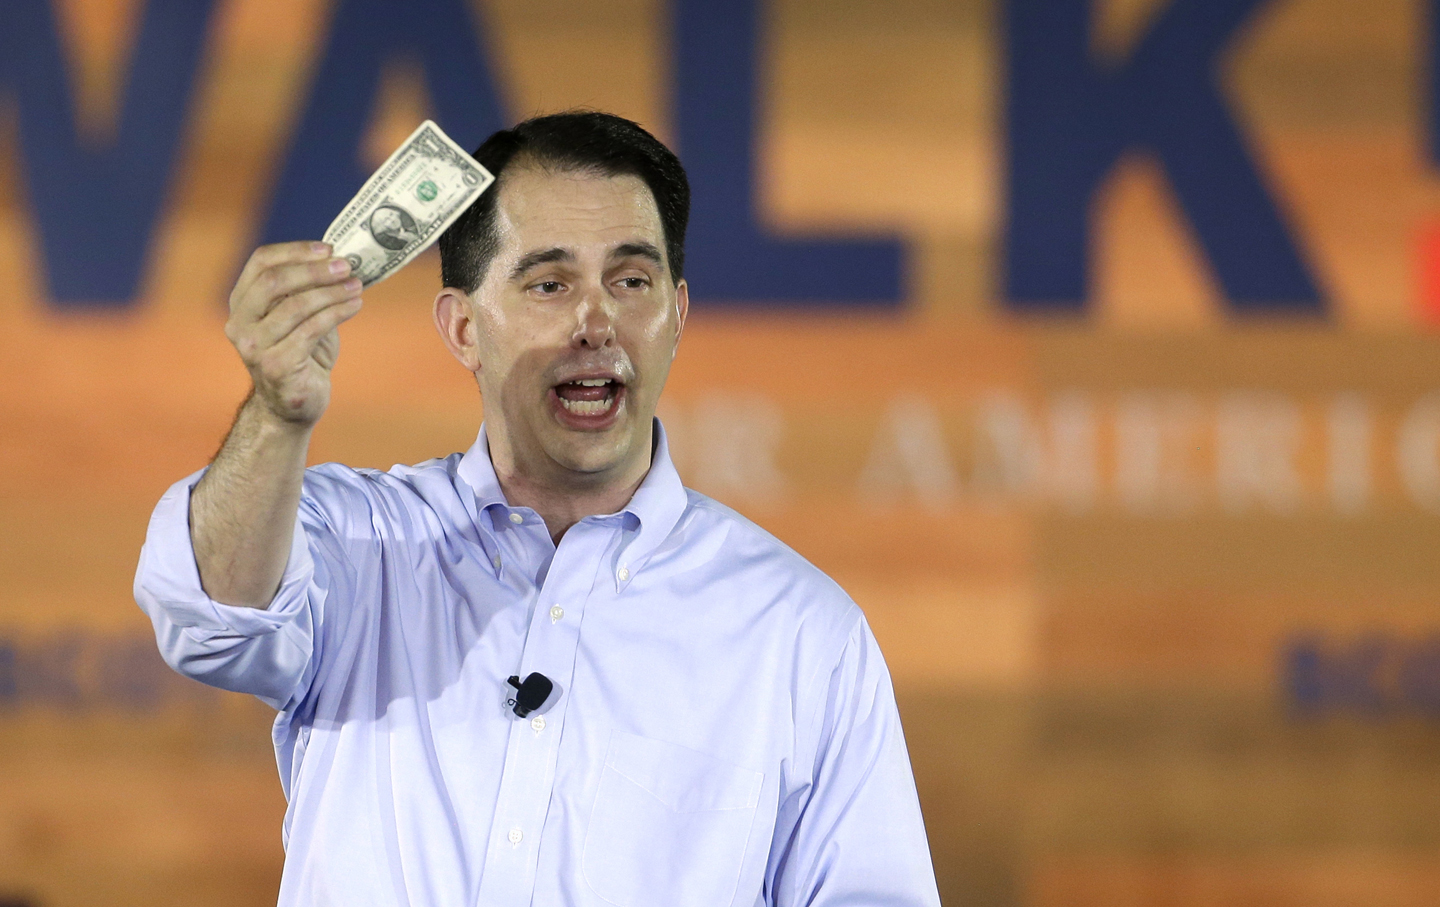 Wisconsin Governor Scott Walker holds a dollar bill as he announces his 2016 Republican presidential campaign.